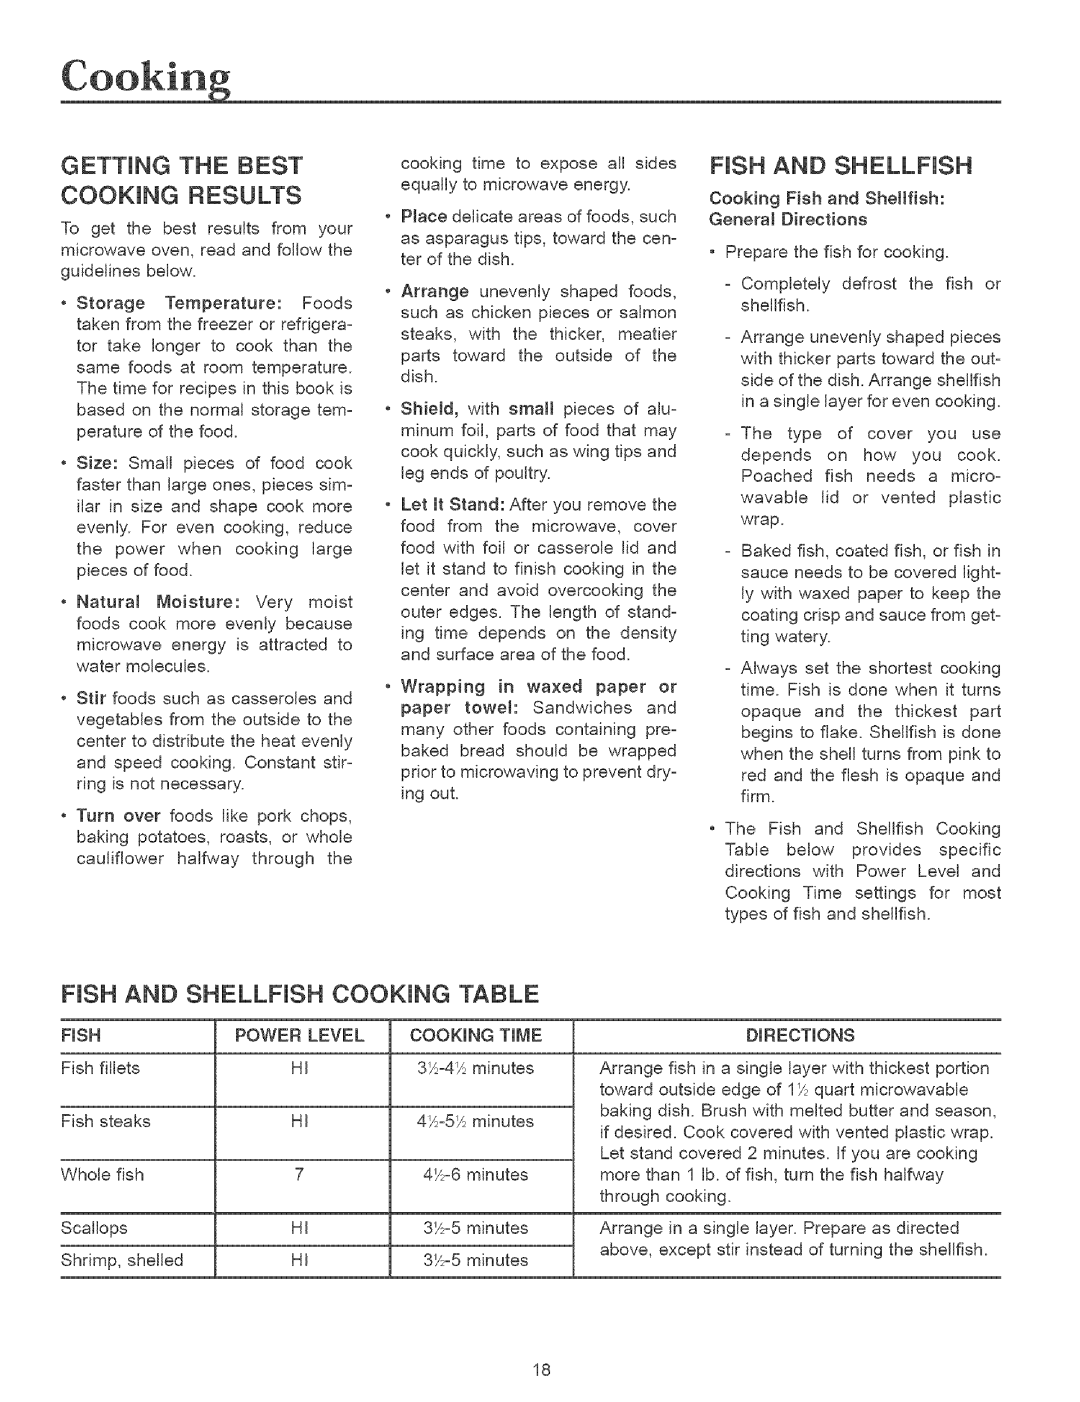 Maytag MMVS156AA owner manual Getting The Best Cooking Results, FiSH AND SHELLFISH COOKING TABLE 